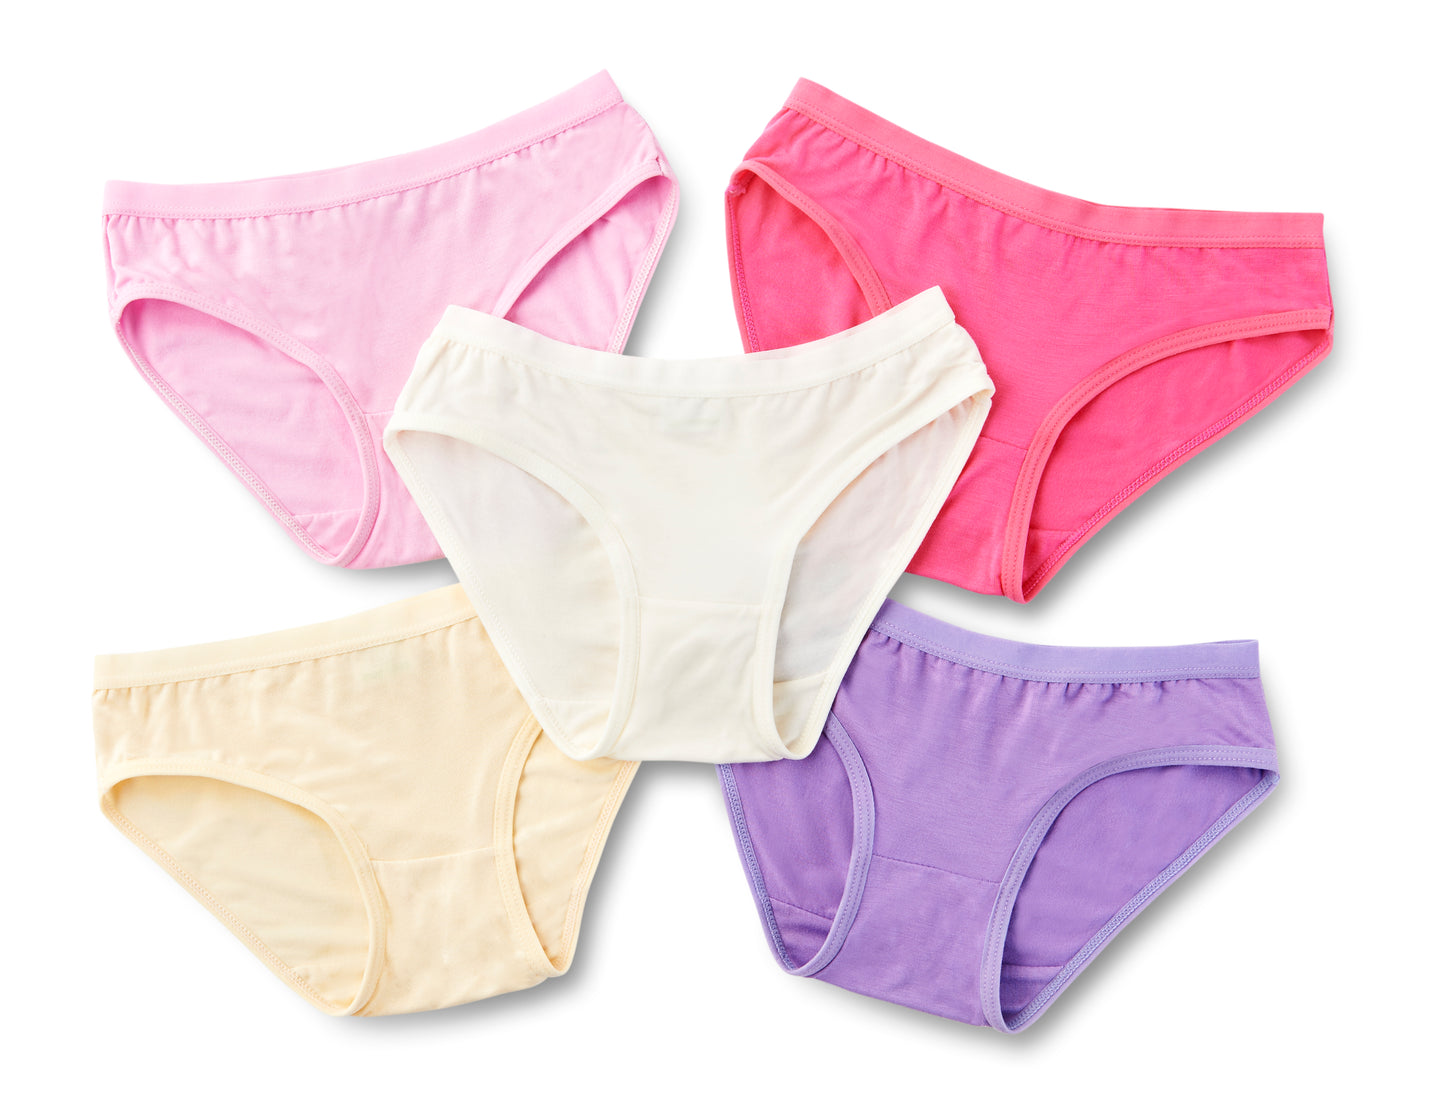 Girls Briefs (5-Pack Set) - With Thin Elastic Band